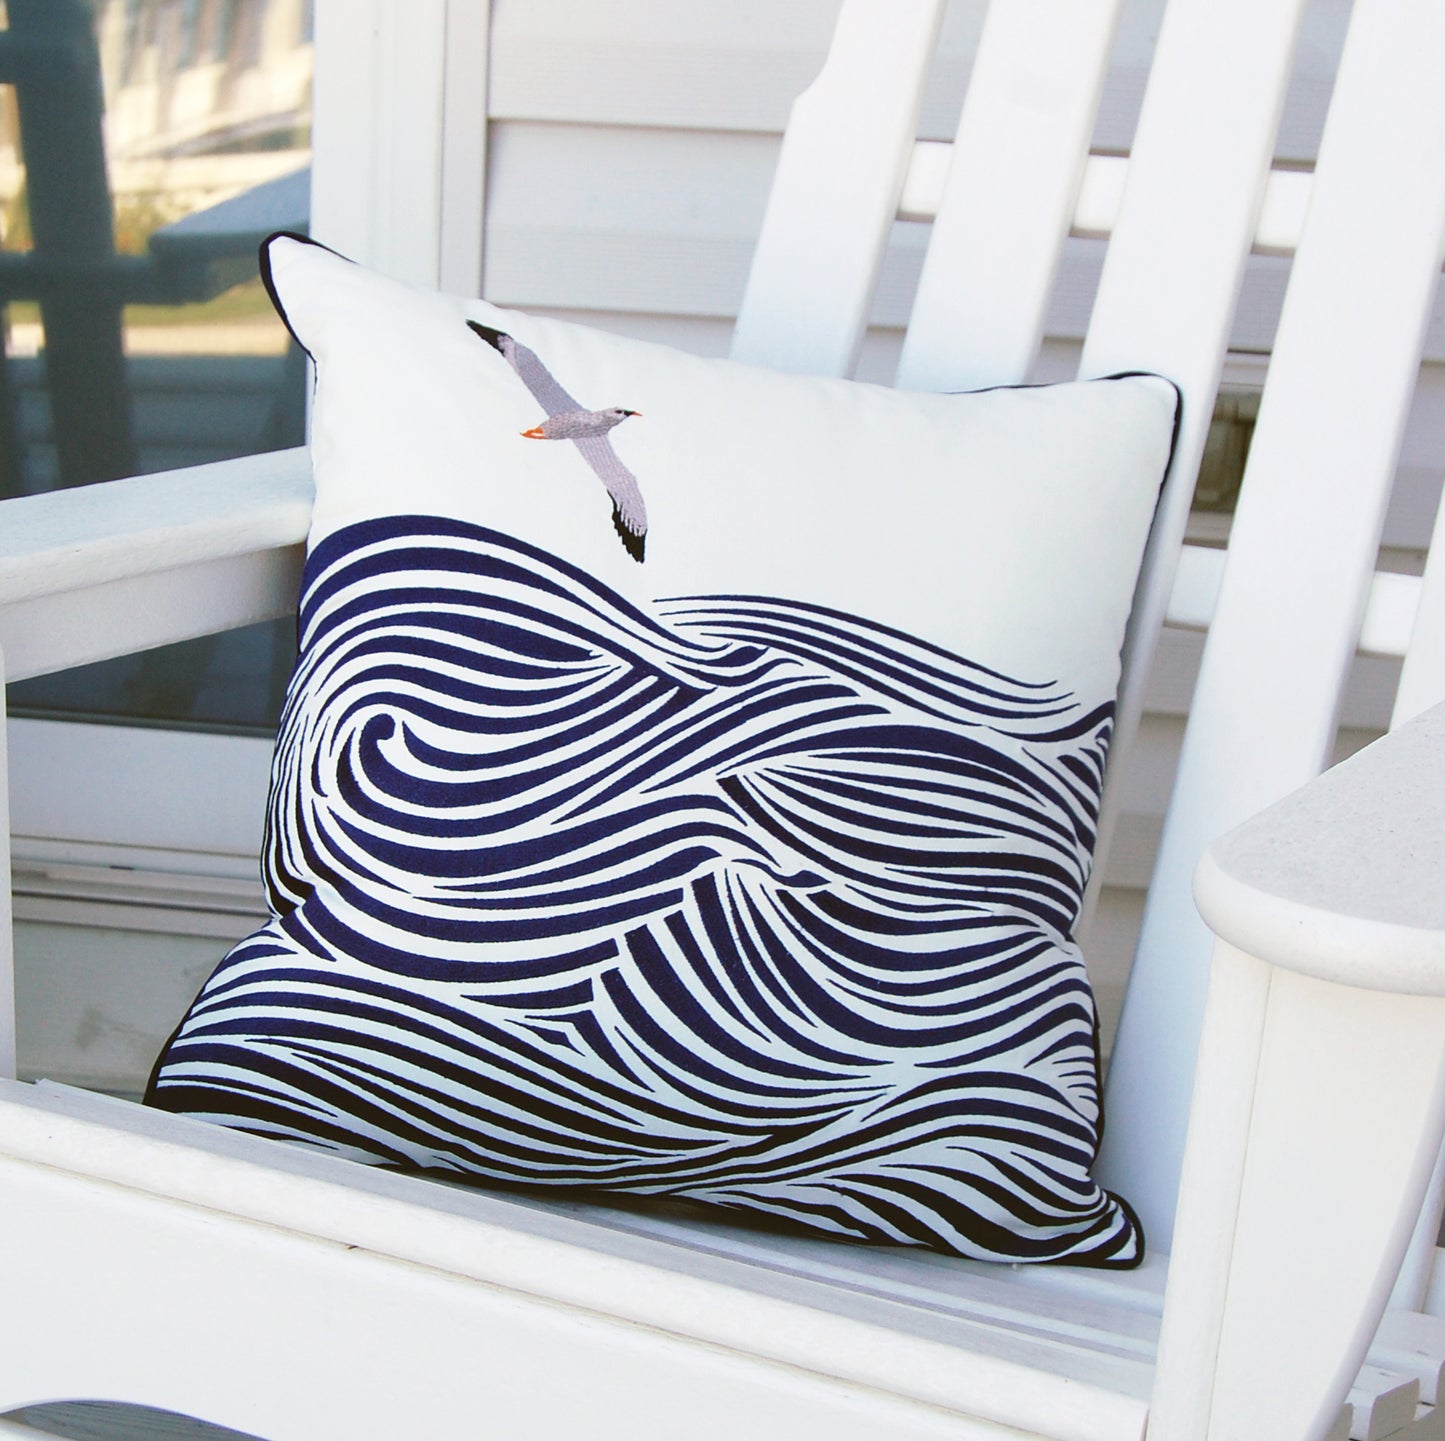 An albatross flying above blue lined waves embroidered on a white outdoor pillow..